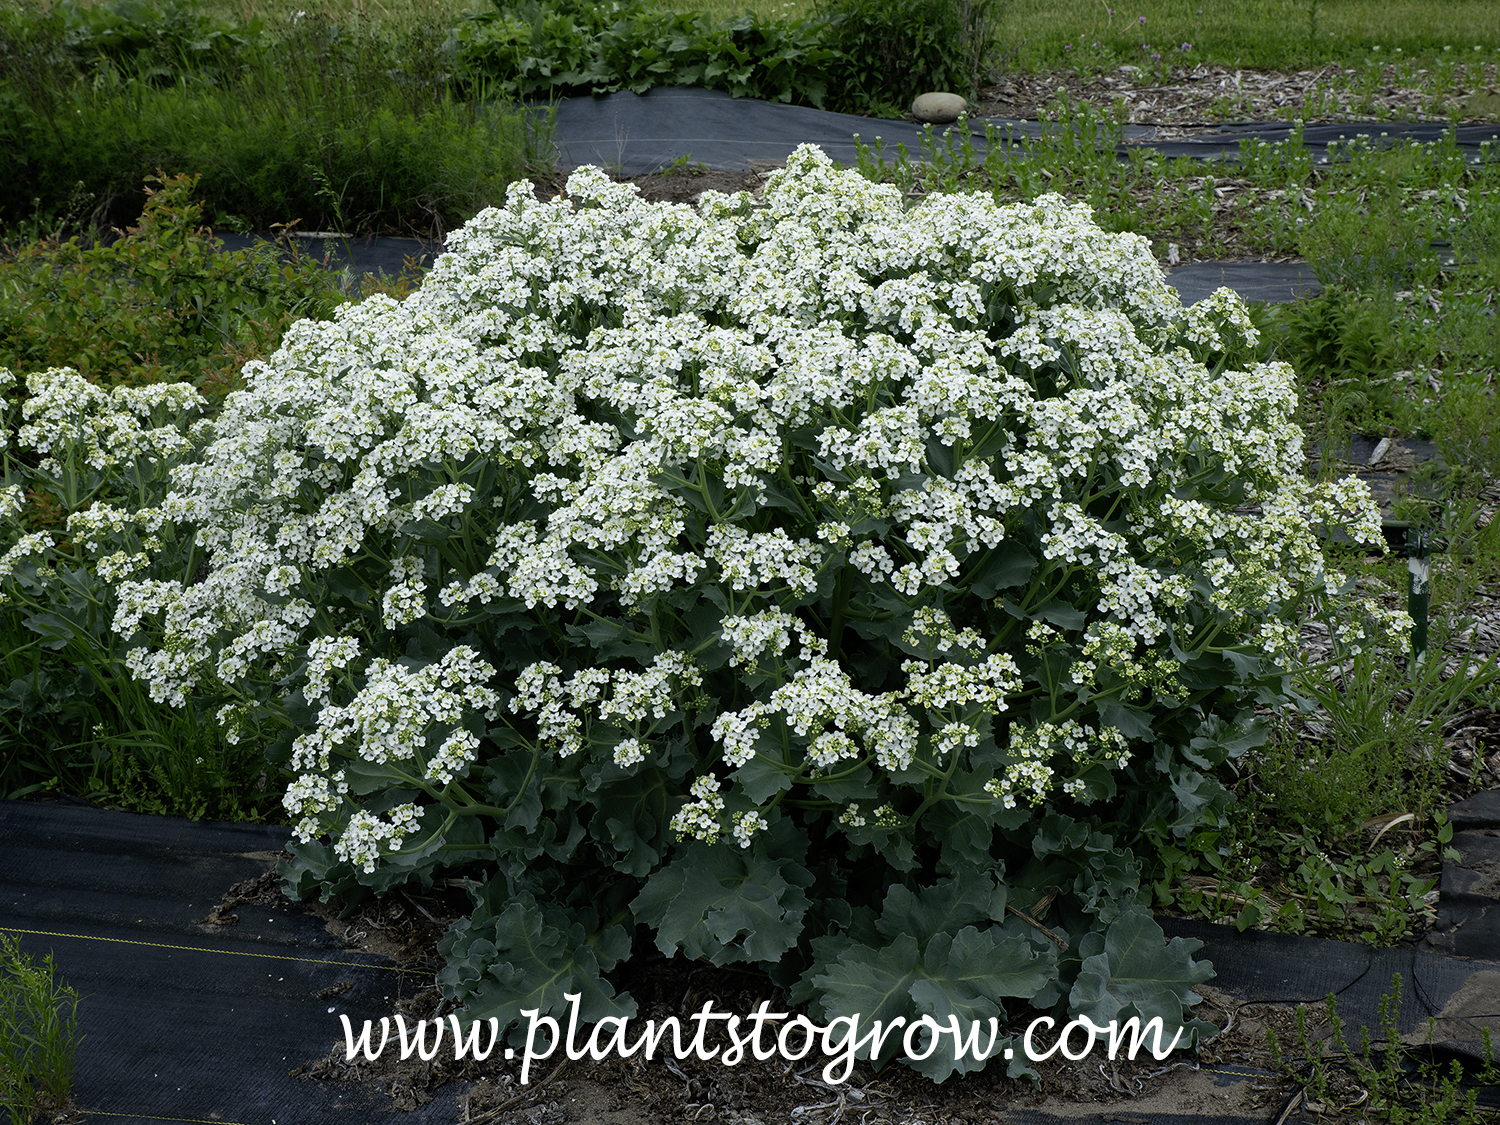 Sea Kale (Crambe maritima) 
A large plant in a seed stock bed.